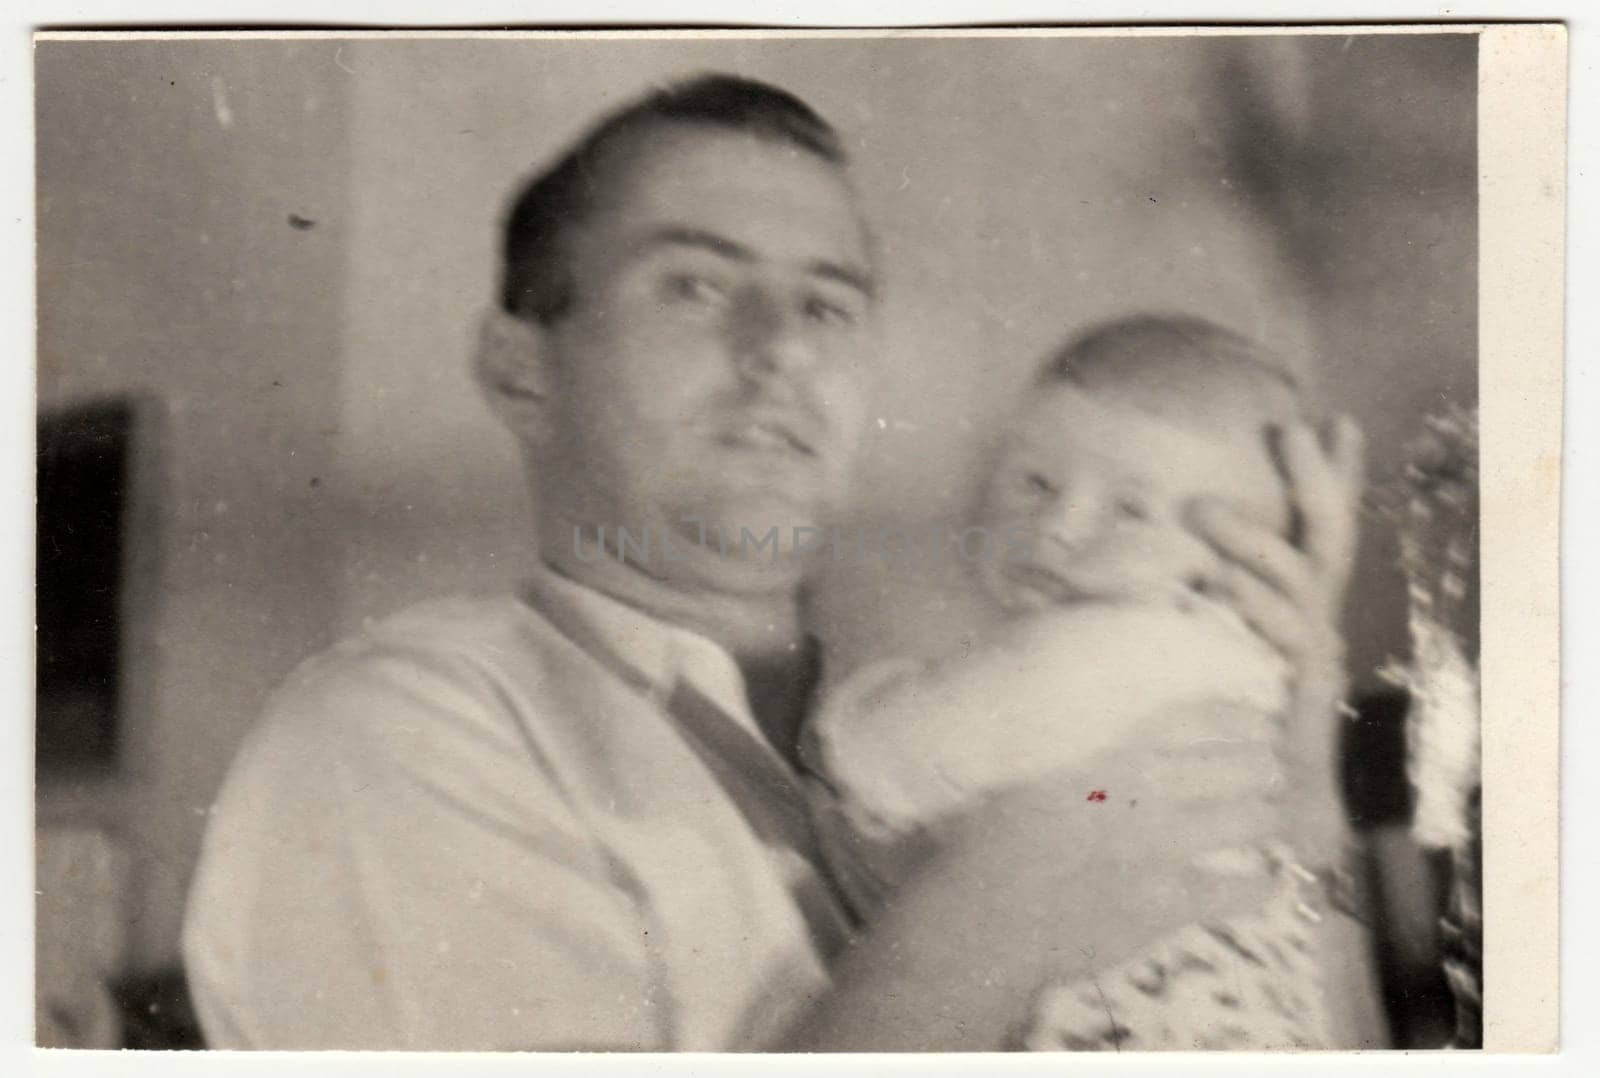 THE CZECHOSLOVAK SOCIALIST REPUBLIC - CIRCA 1950s: Retro photo shows father and toddler. Vintage black and white photography. With original film grain, blur and scratches.